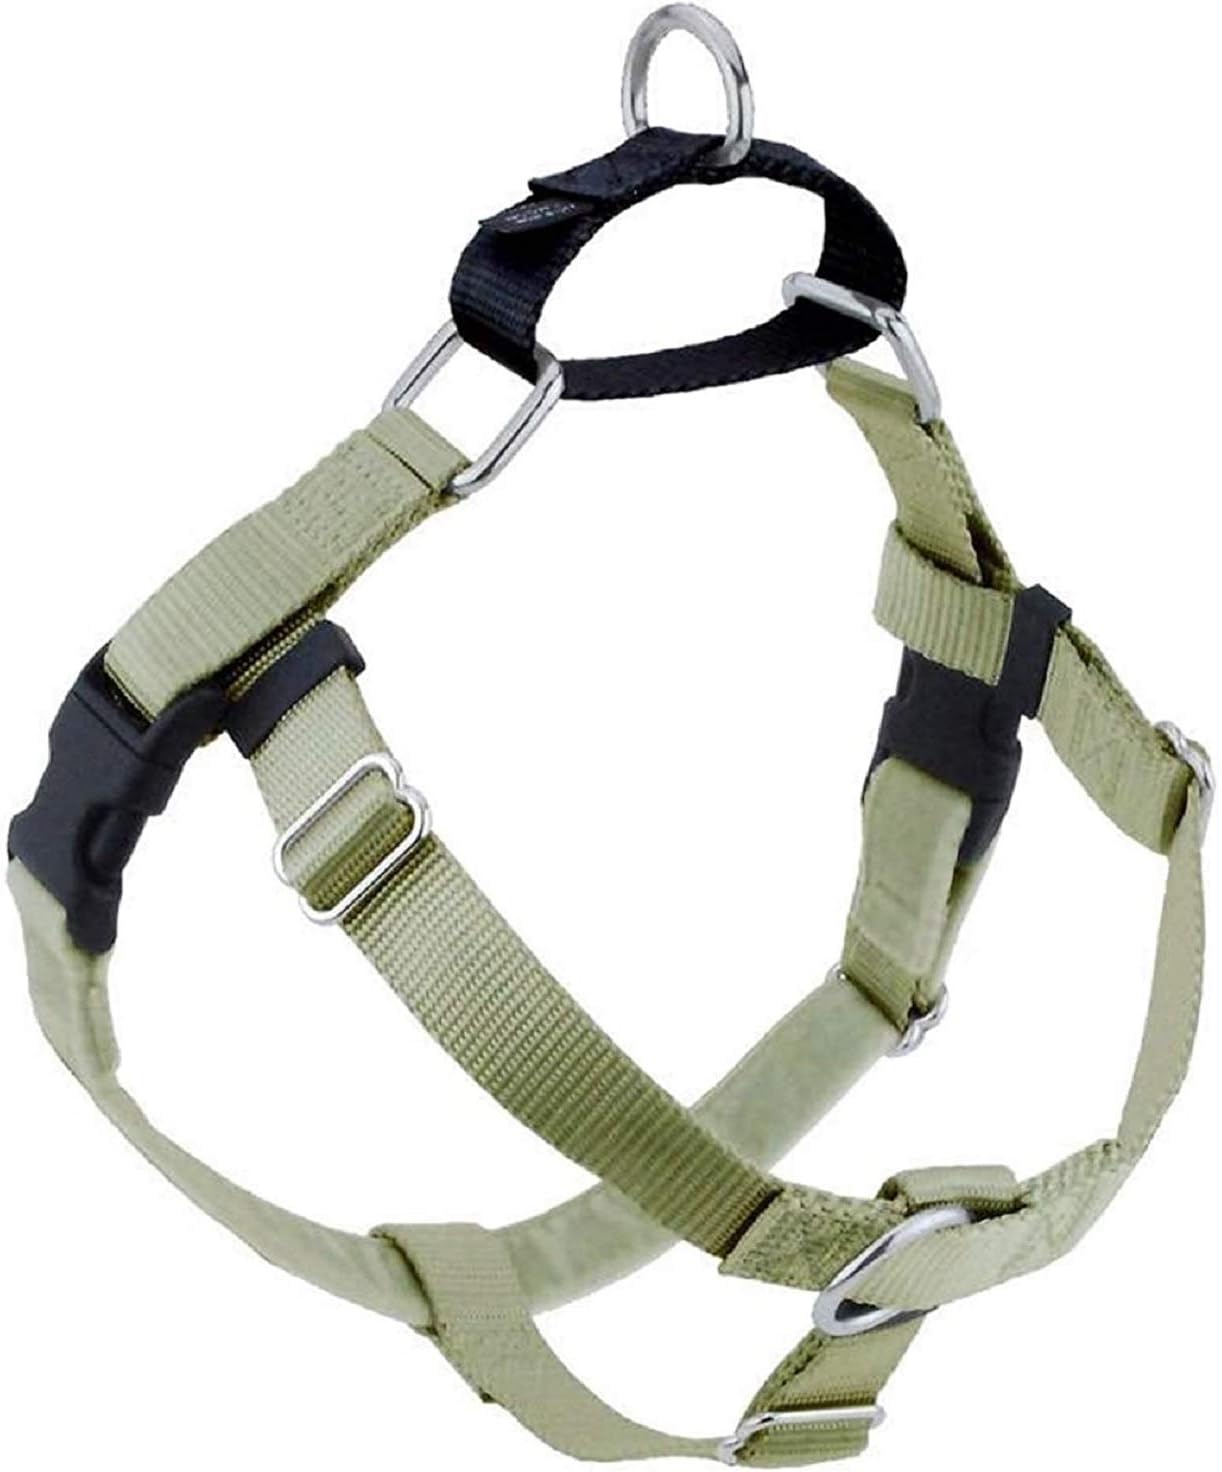 2 Hounds Design Freedom No Pull Dog Harness1" XL, Tan